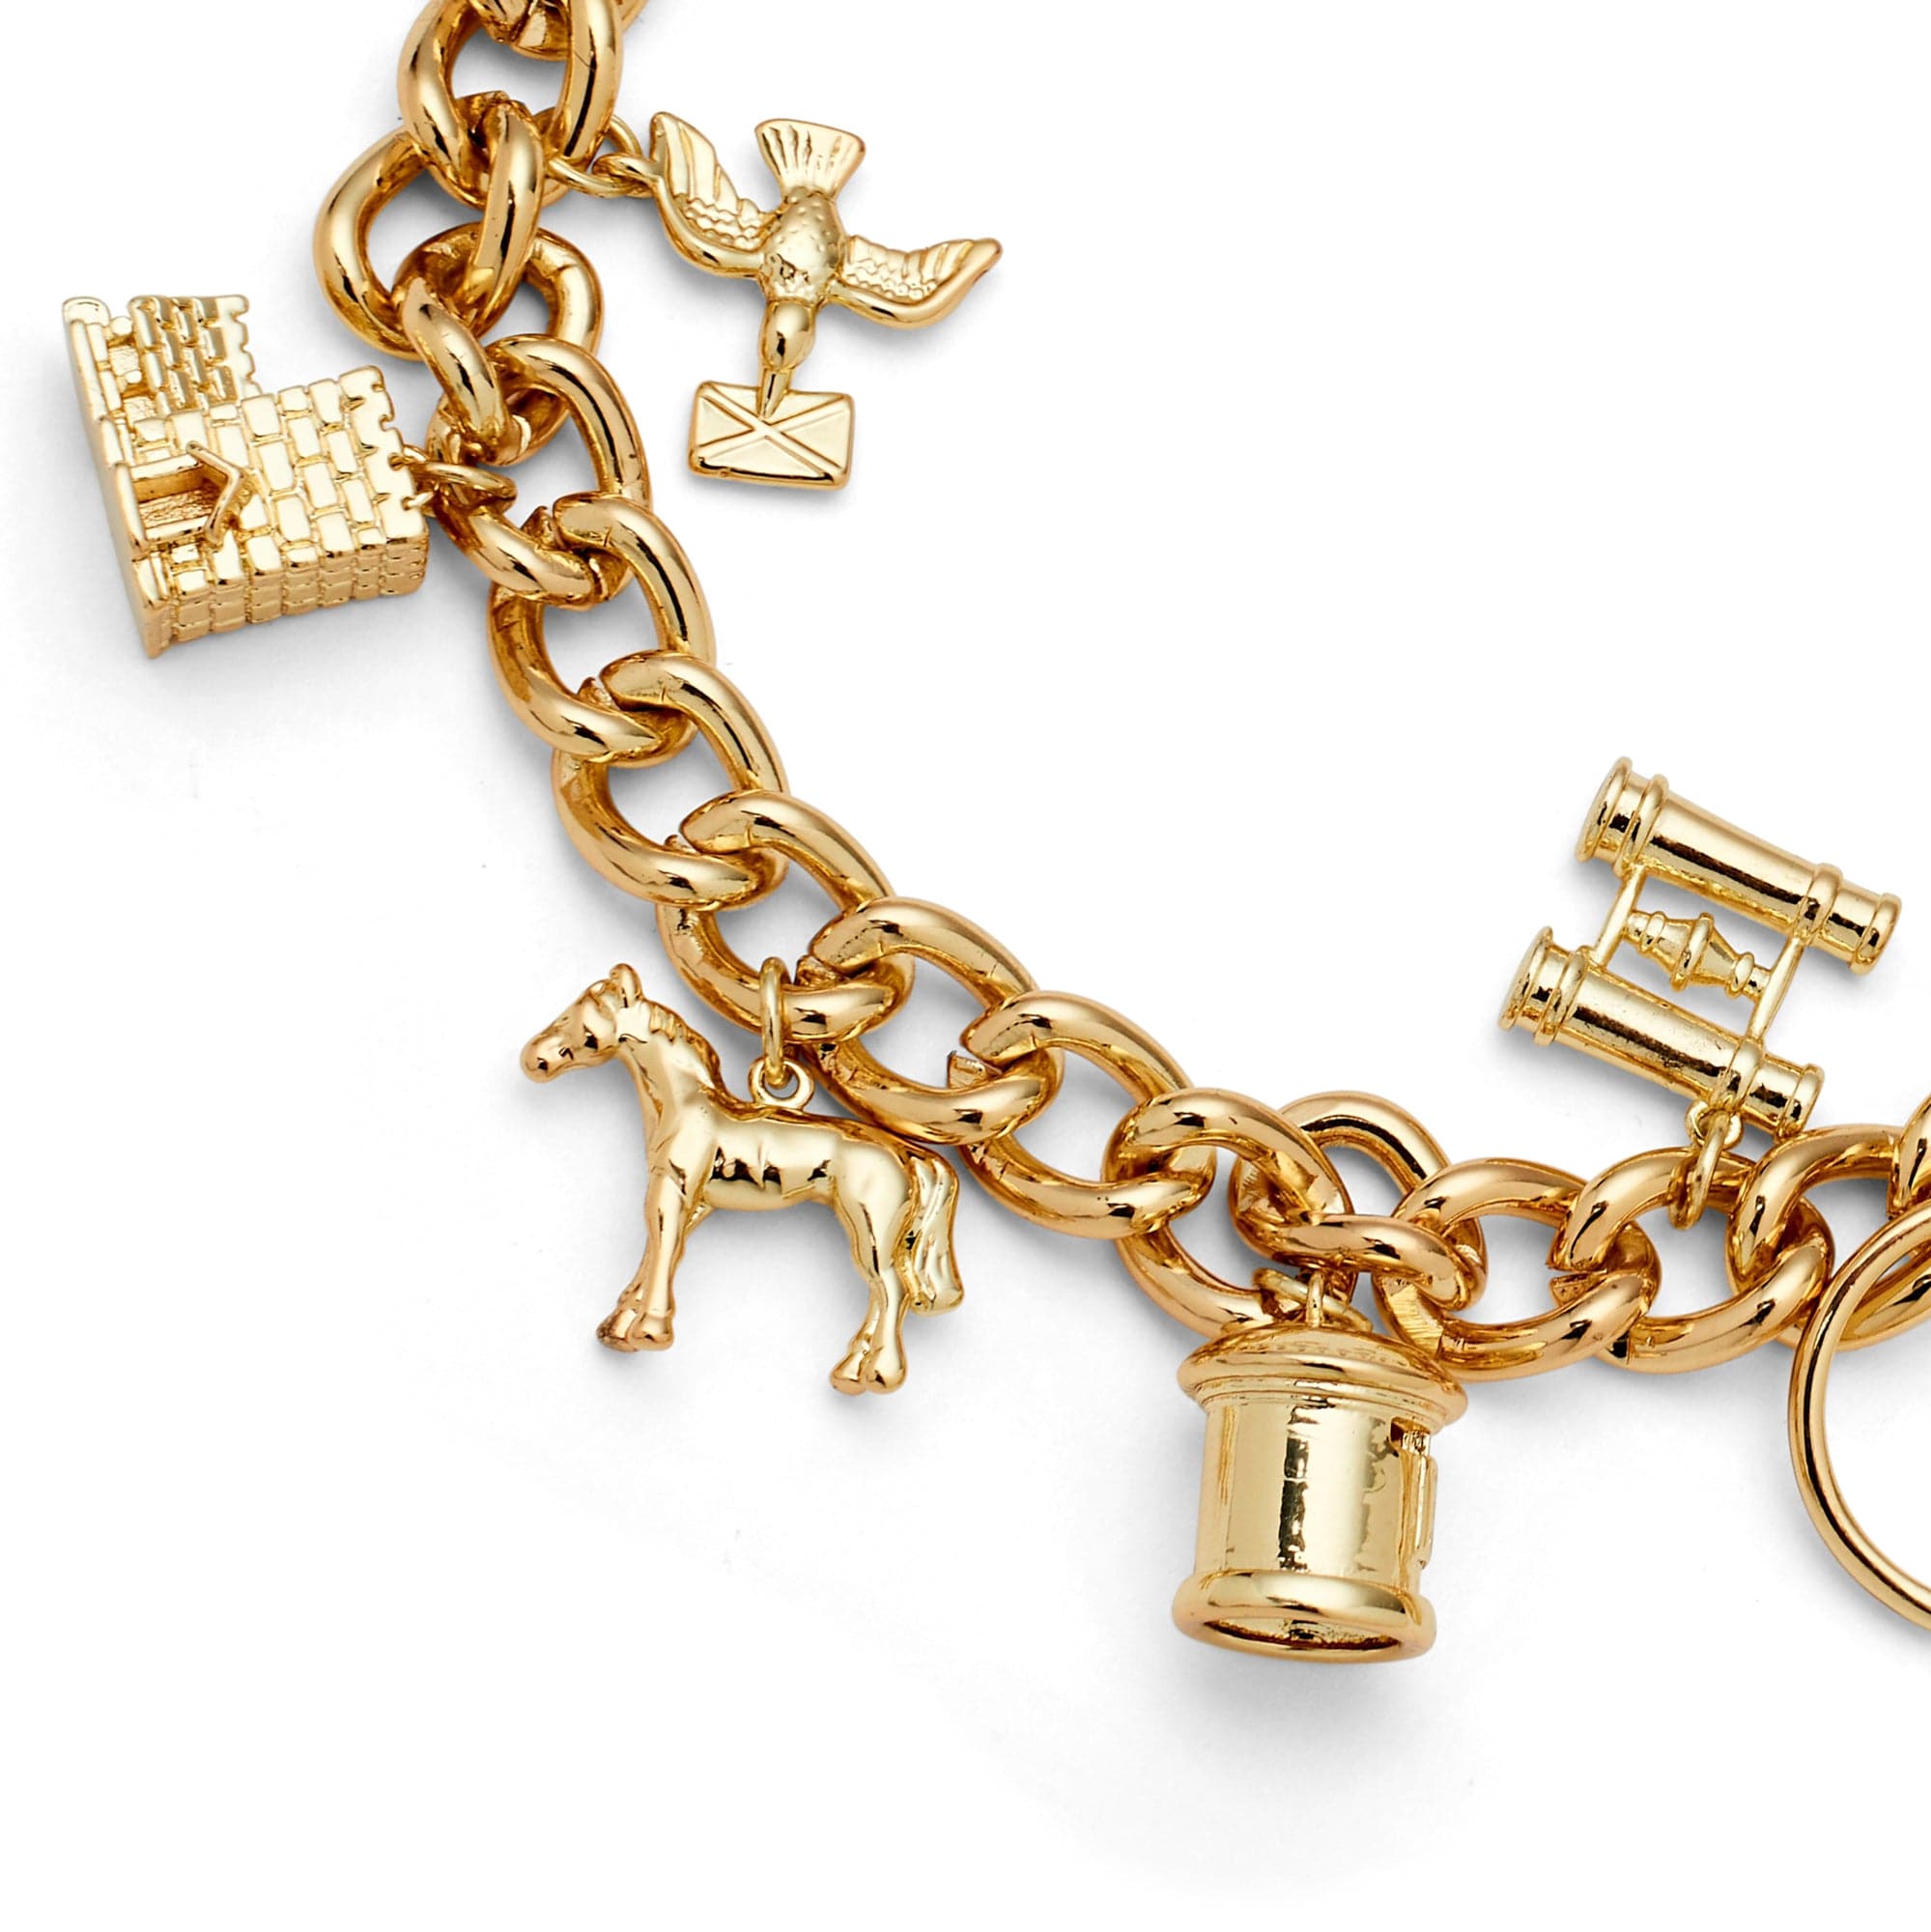 Close-up of Gold Various Charms Bracelet with Heart-shaped Lock